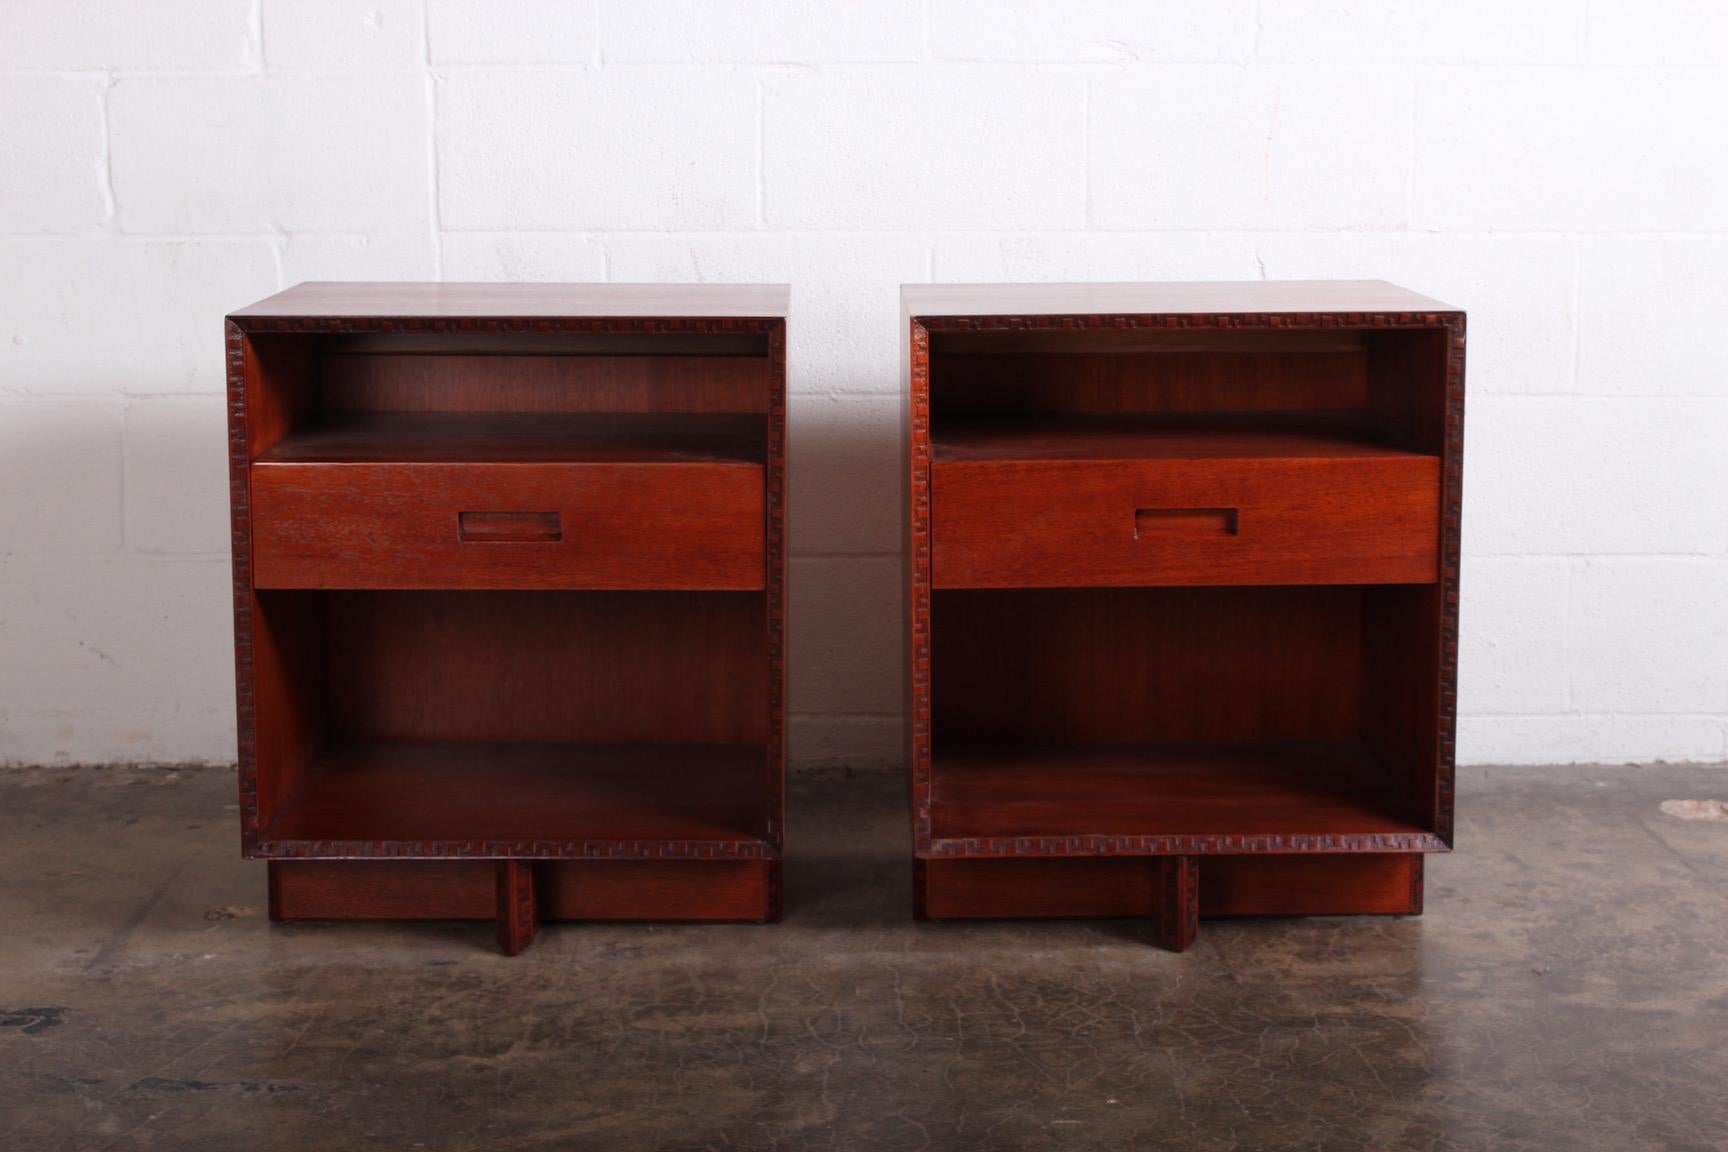 A pair of mahogany nightstands designed by Frank Lloyd Wright for Henredon.